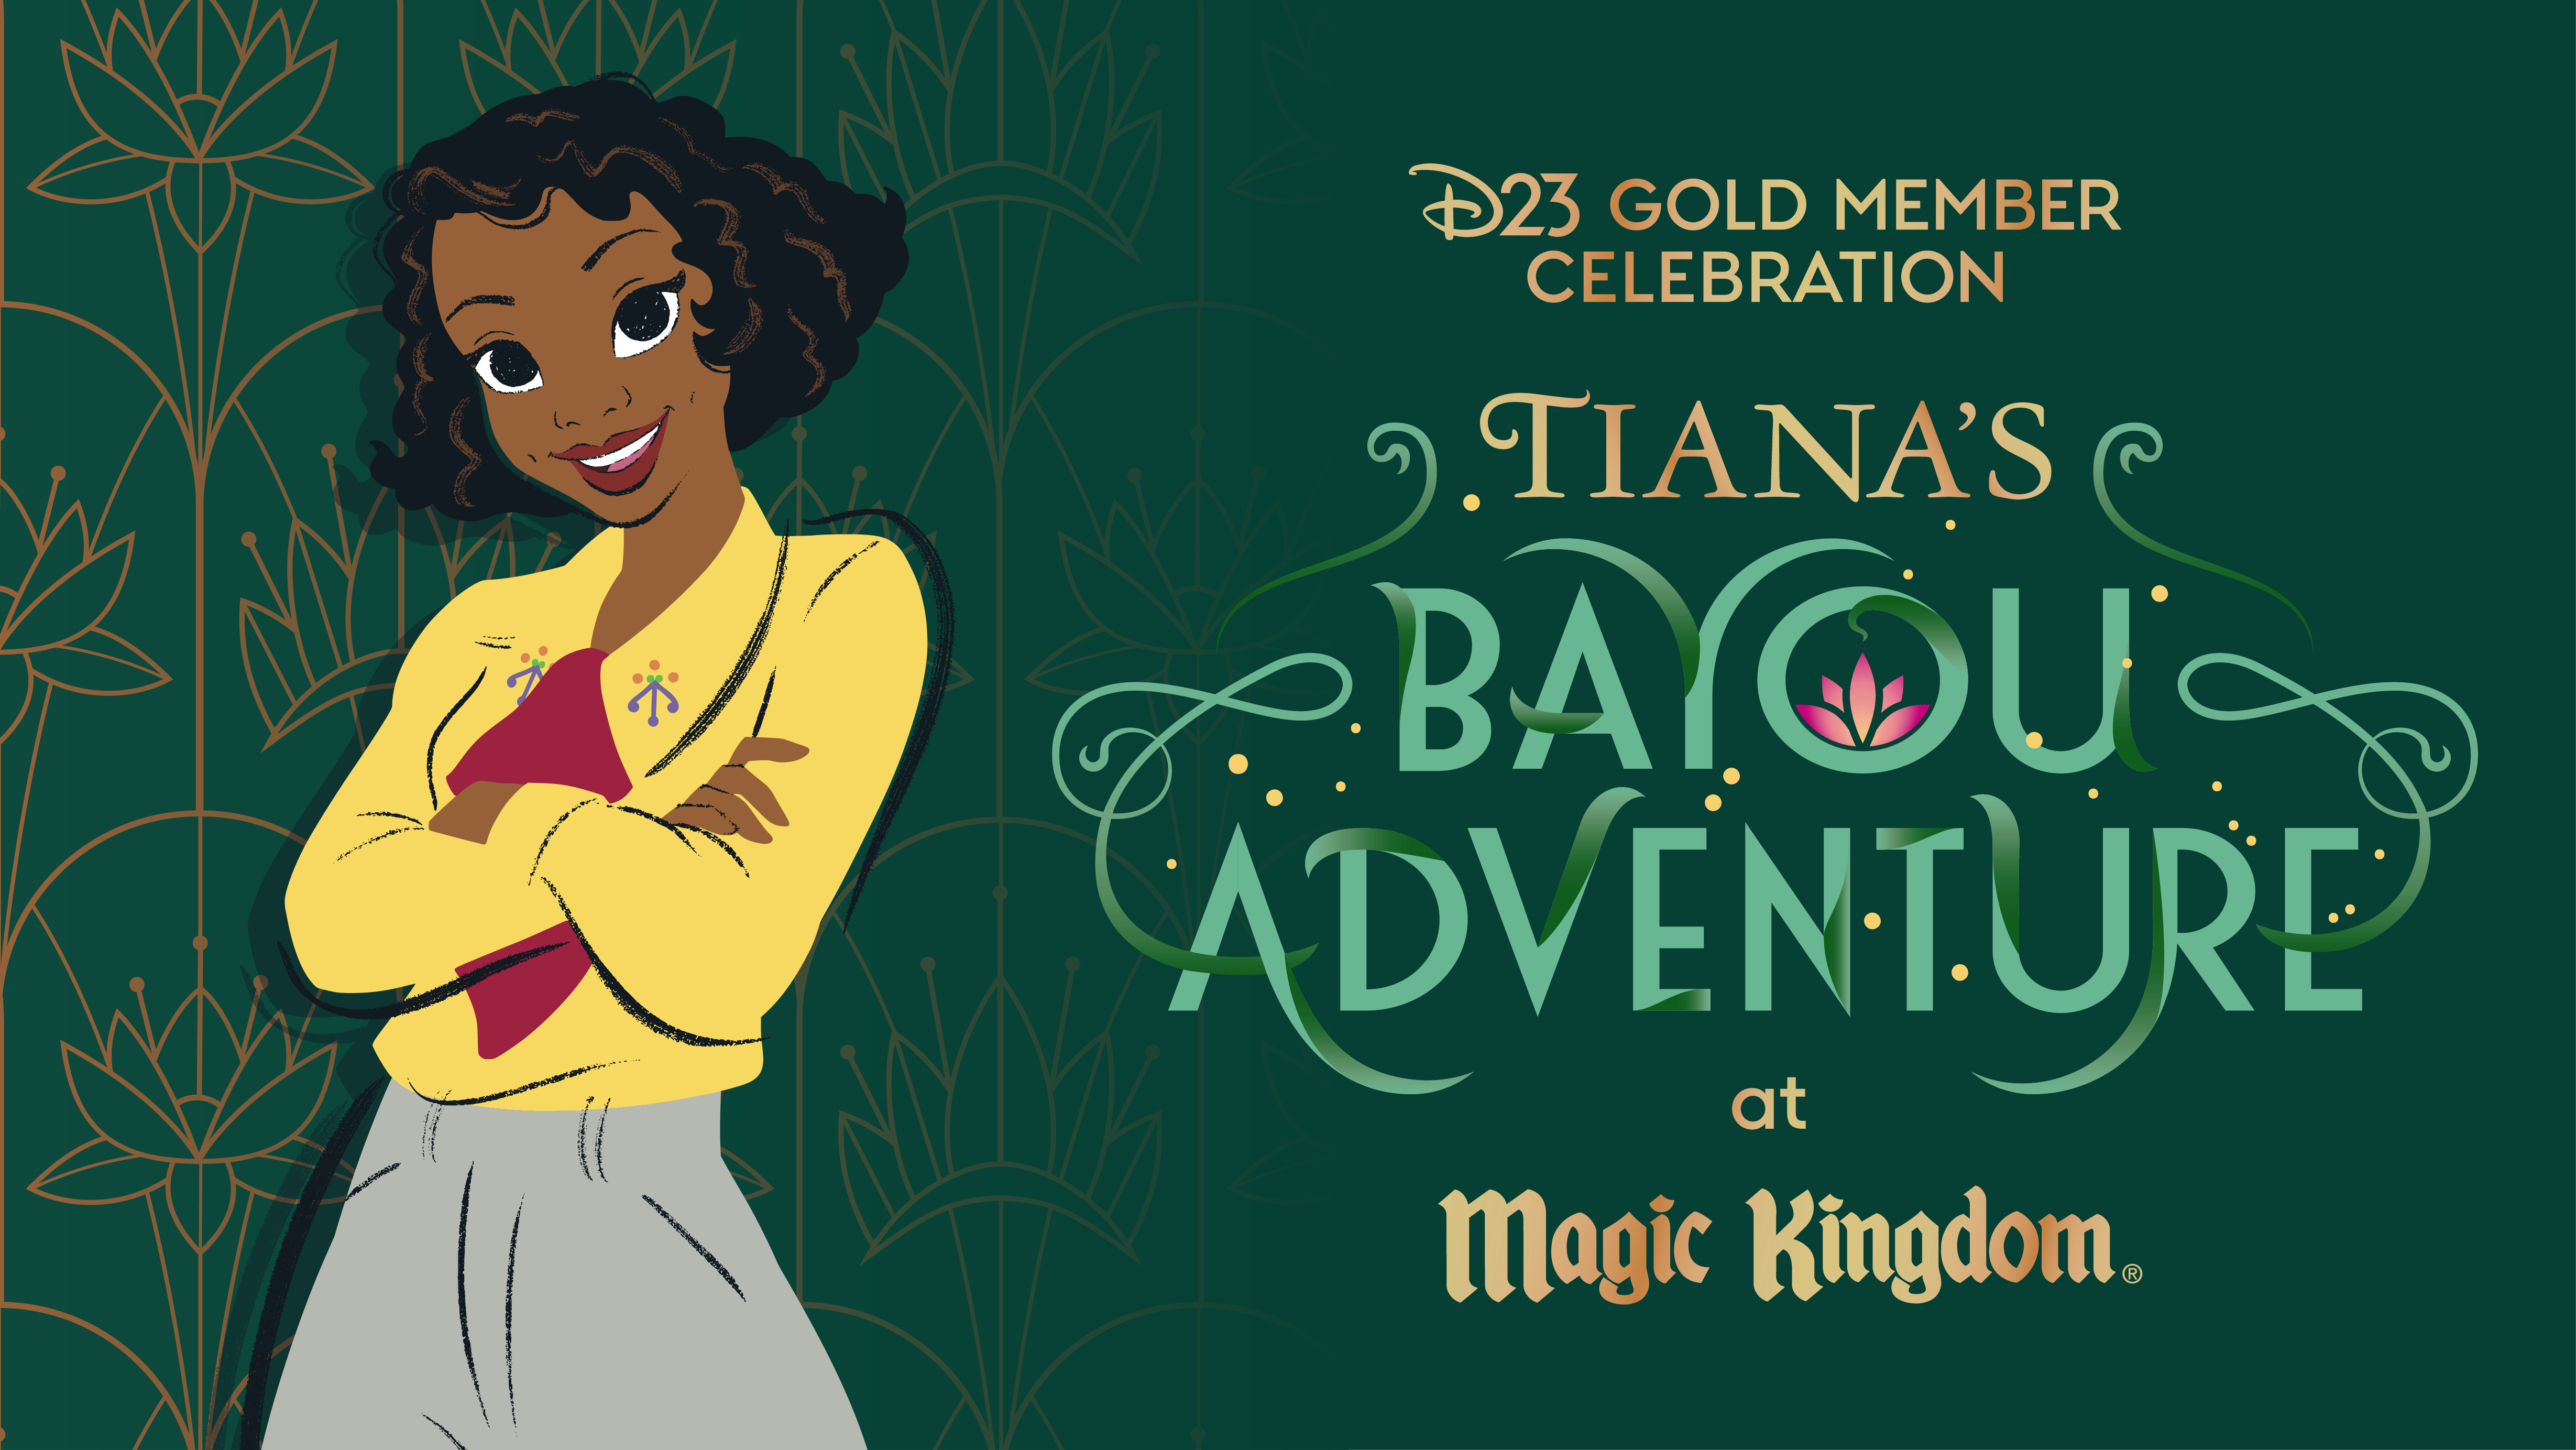 Image depicting event name in gold and shades of green: “D23 Gold Member Celebration. Tiana’s Bayou Adventure at Magic Kingdom.” Tiana is wearing a yellow blouse, maroon scarf, and green-gray pants, looking straight forward, smiling with her arms casually crossed, standing at left of the image next to the name of the event against a background of gilded art-deco style patterns with gold and plush green.